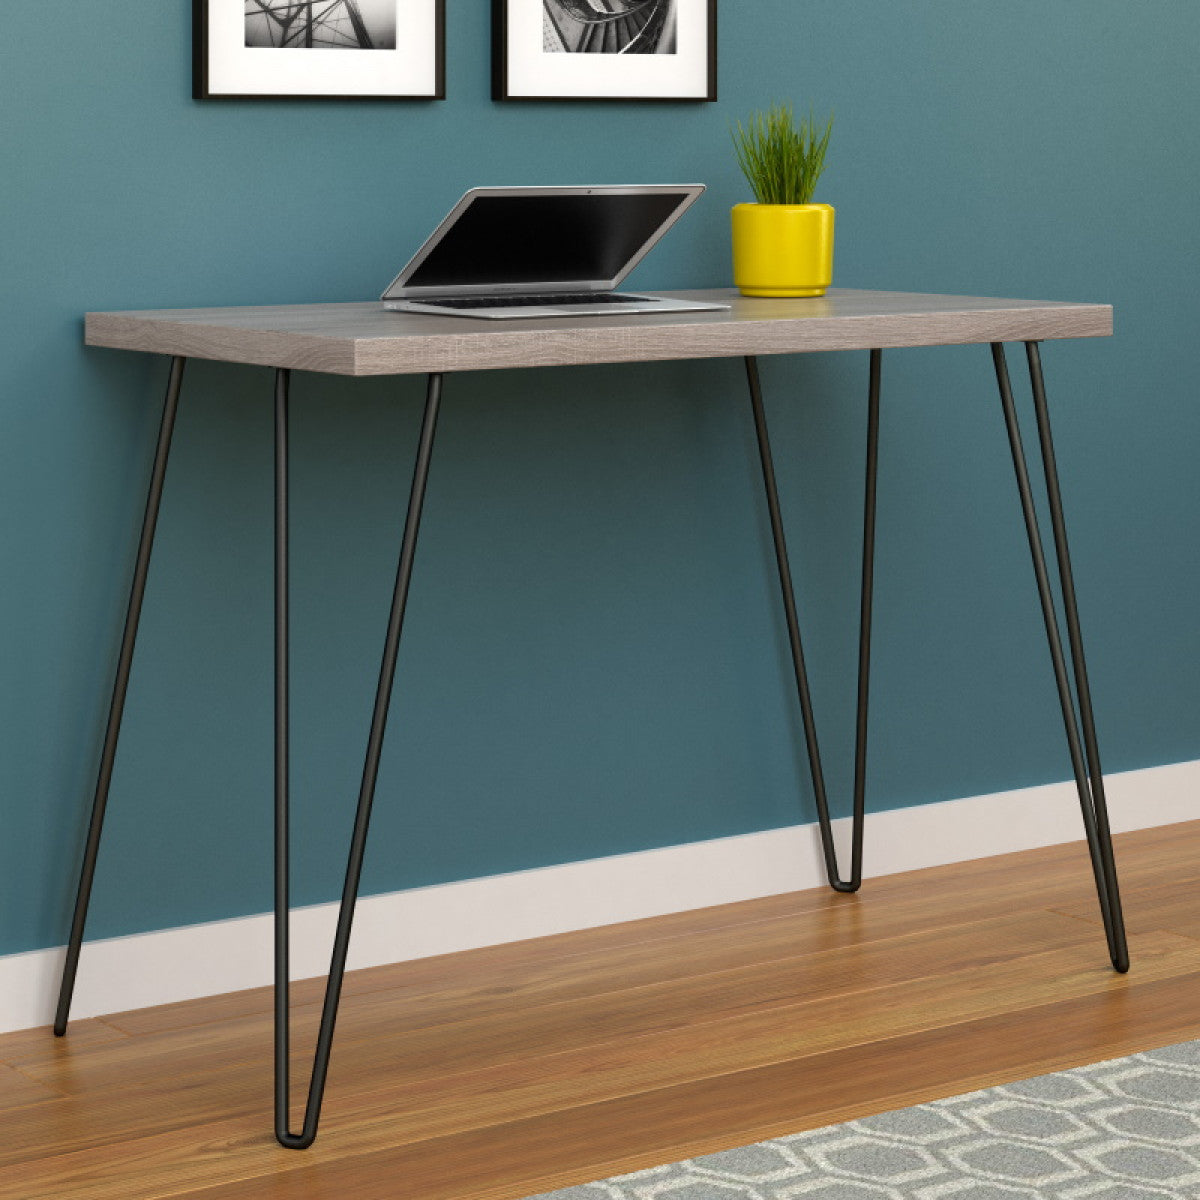 Home Owen Retro Distressed Home Office Desk - Grey Oak | 9851296PCOMUK from Dorel Home - DID Electrical